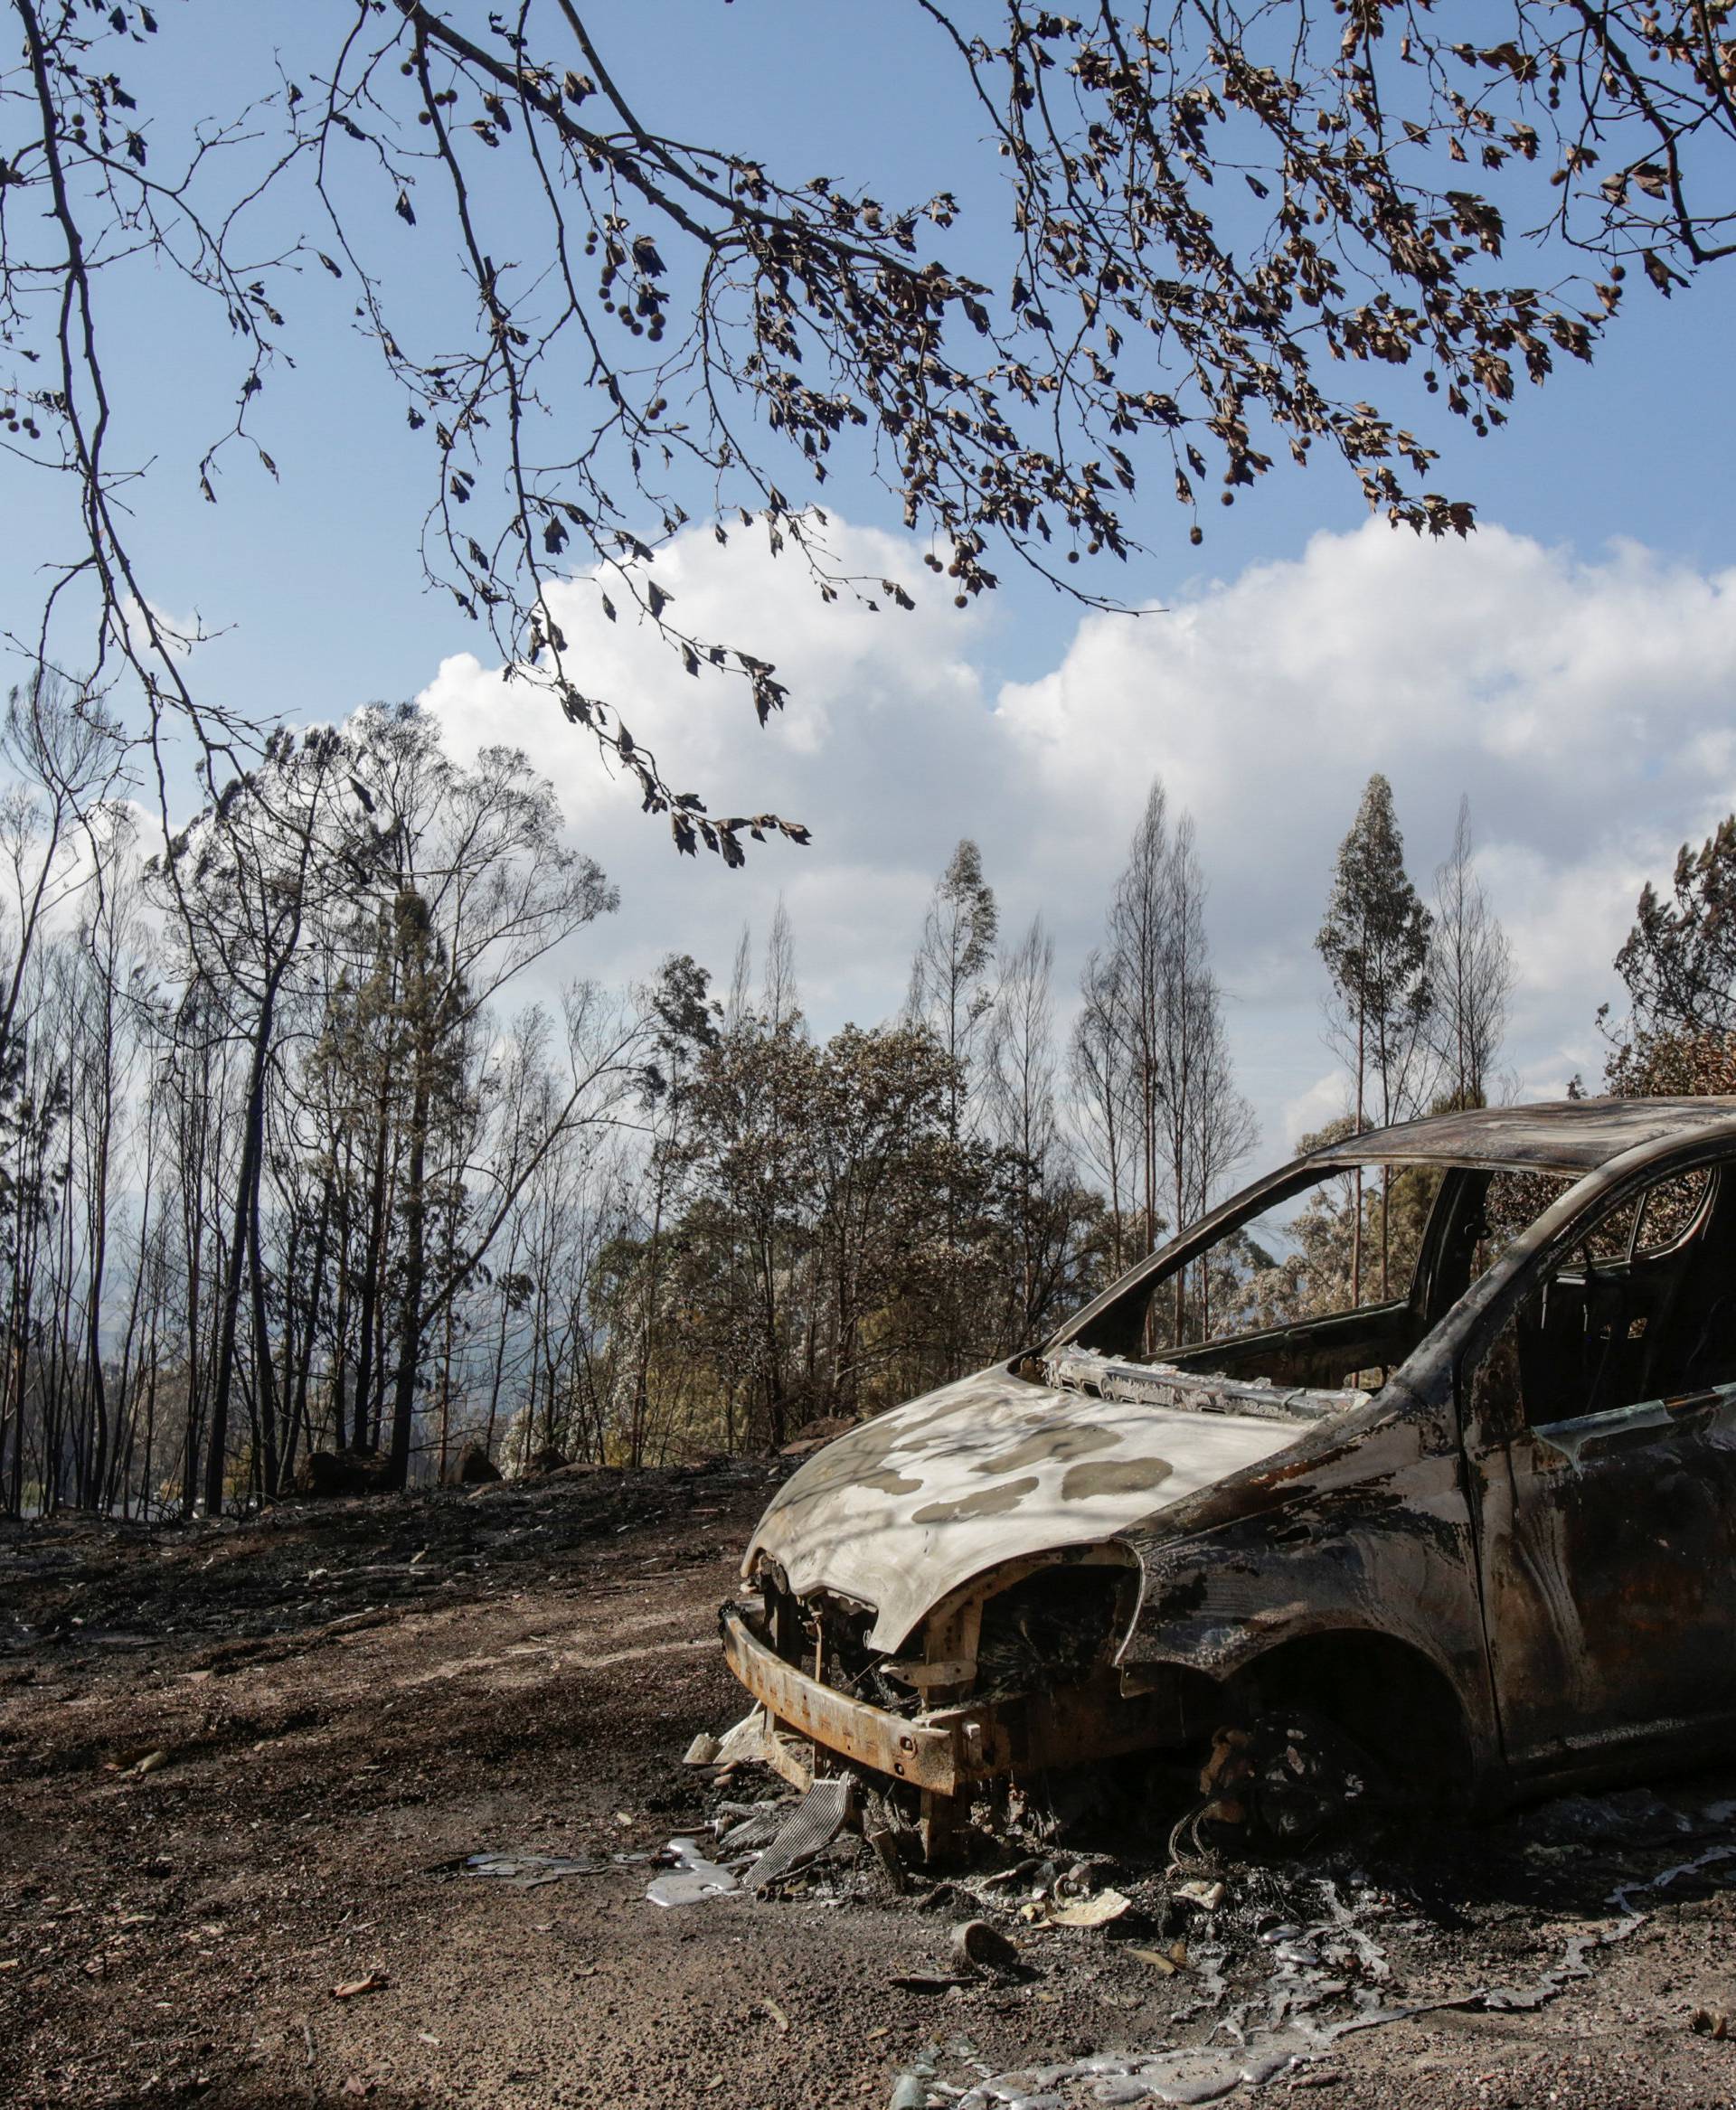 A burnt car is seen after a forest fire near As Neves